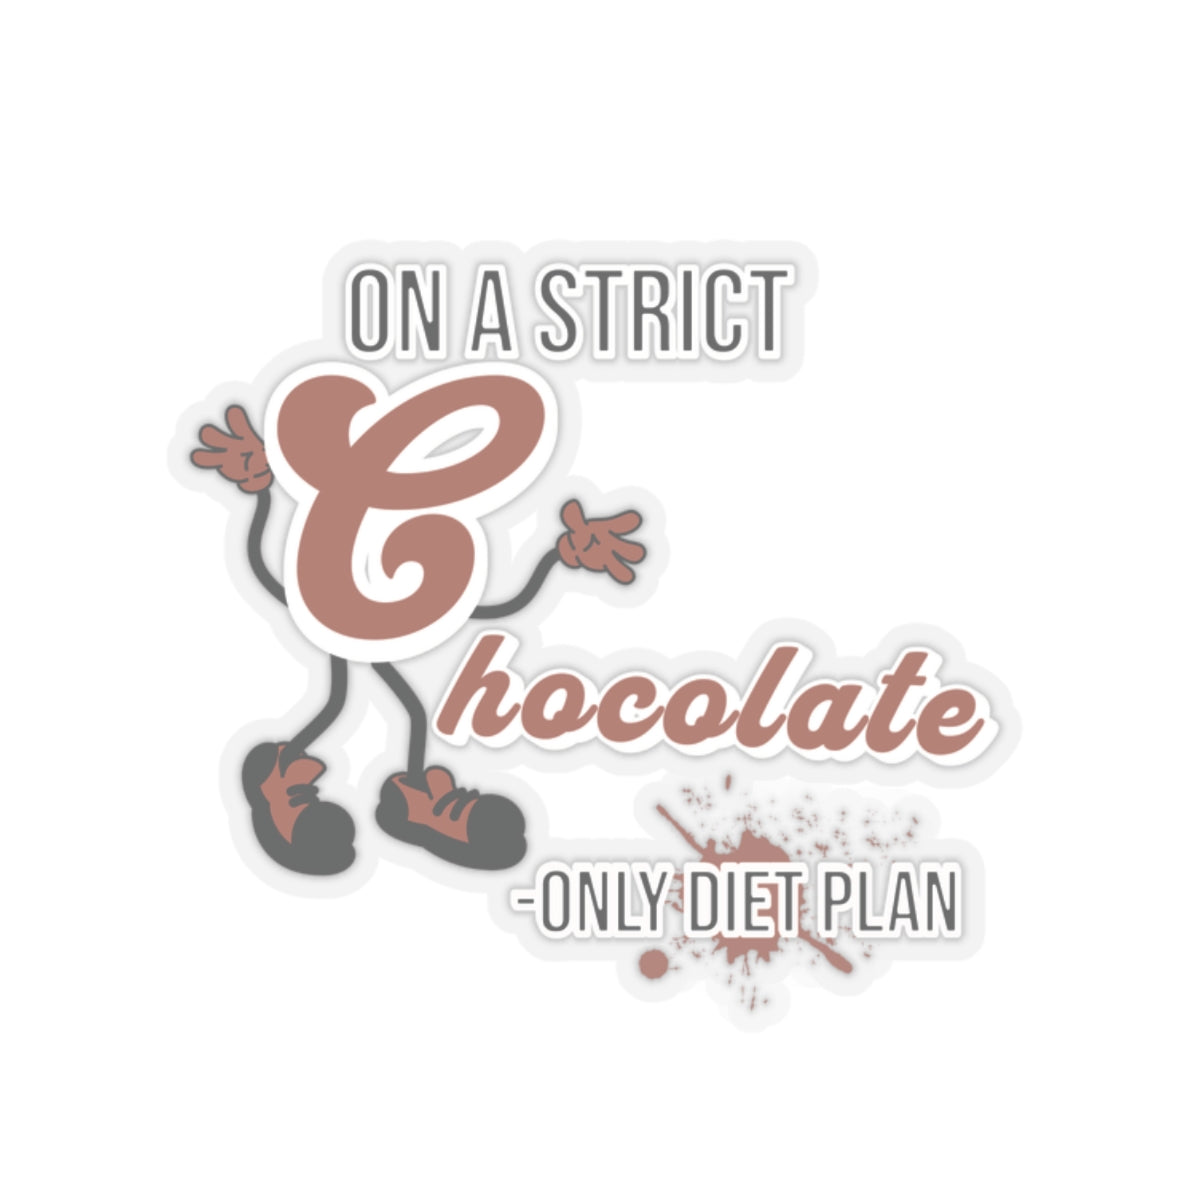 On A Strict Chocolate Only Diet Plan Funny Quote Kiss-Cut Stickers-Paper products-2" × 2"-Transparent-mysticalcherry